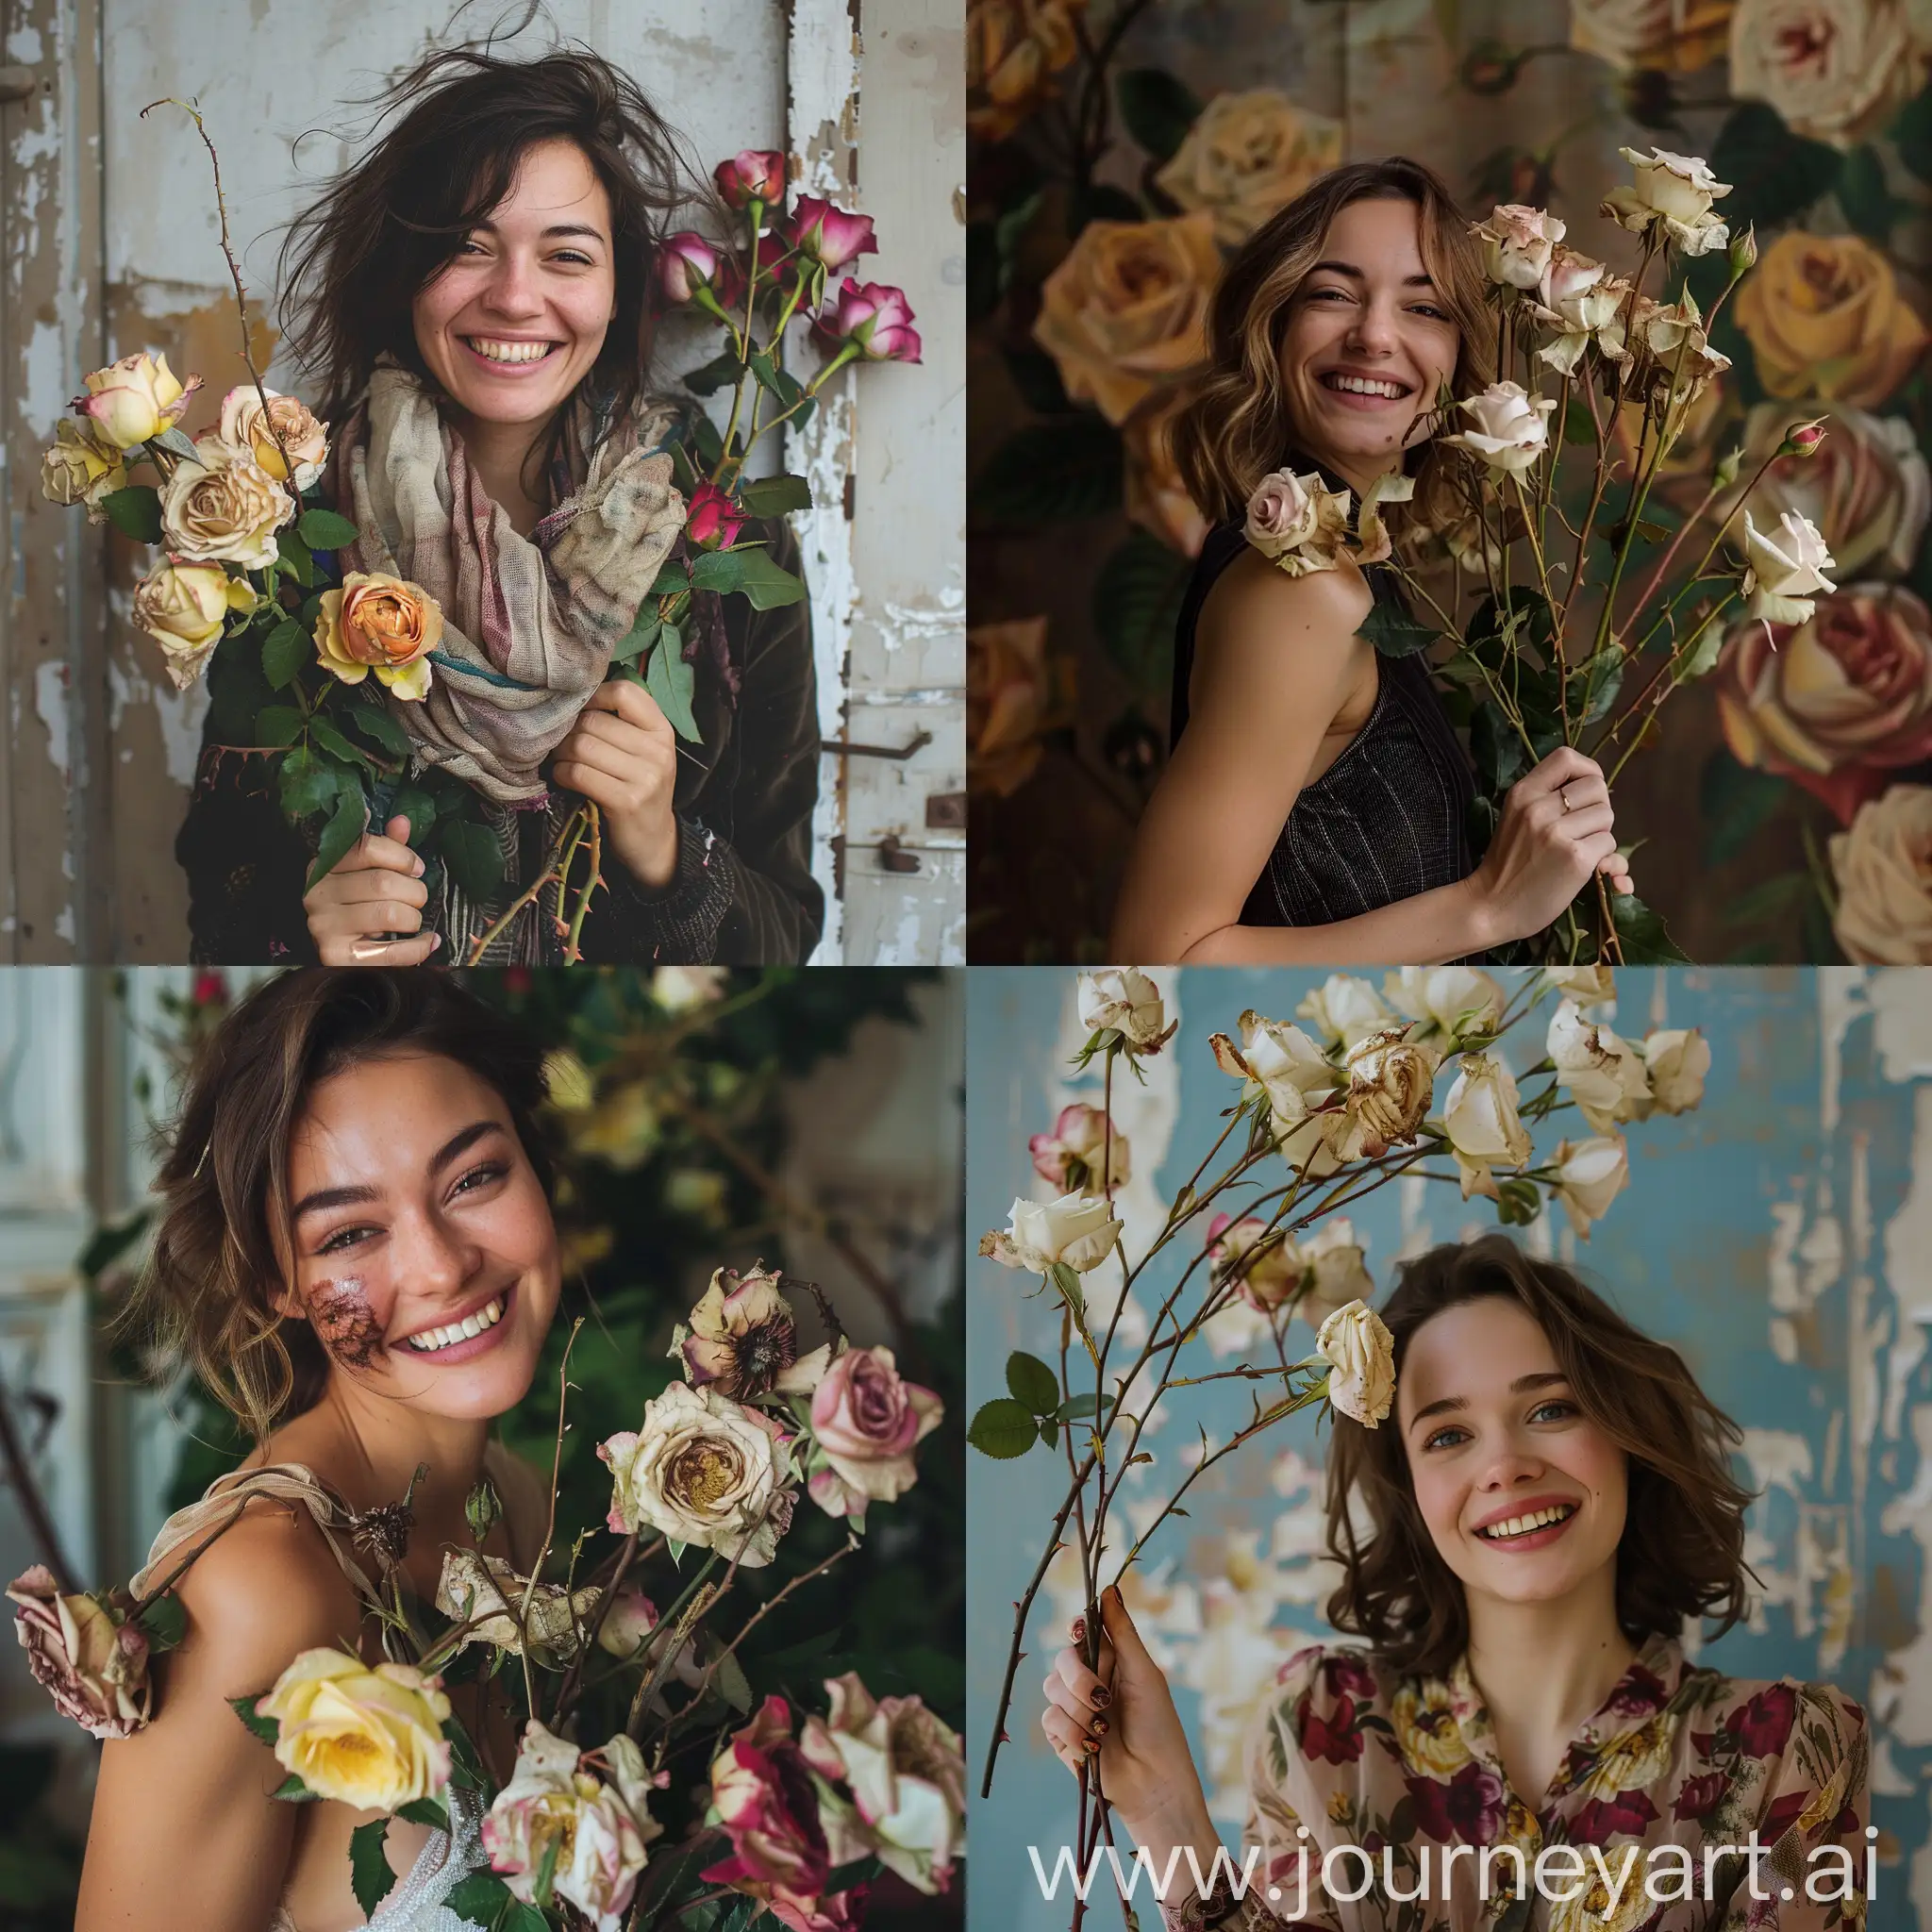 A woman holding dead roses a lot flowers, smiling, artistic composition, photo